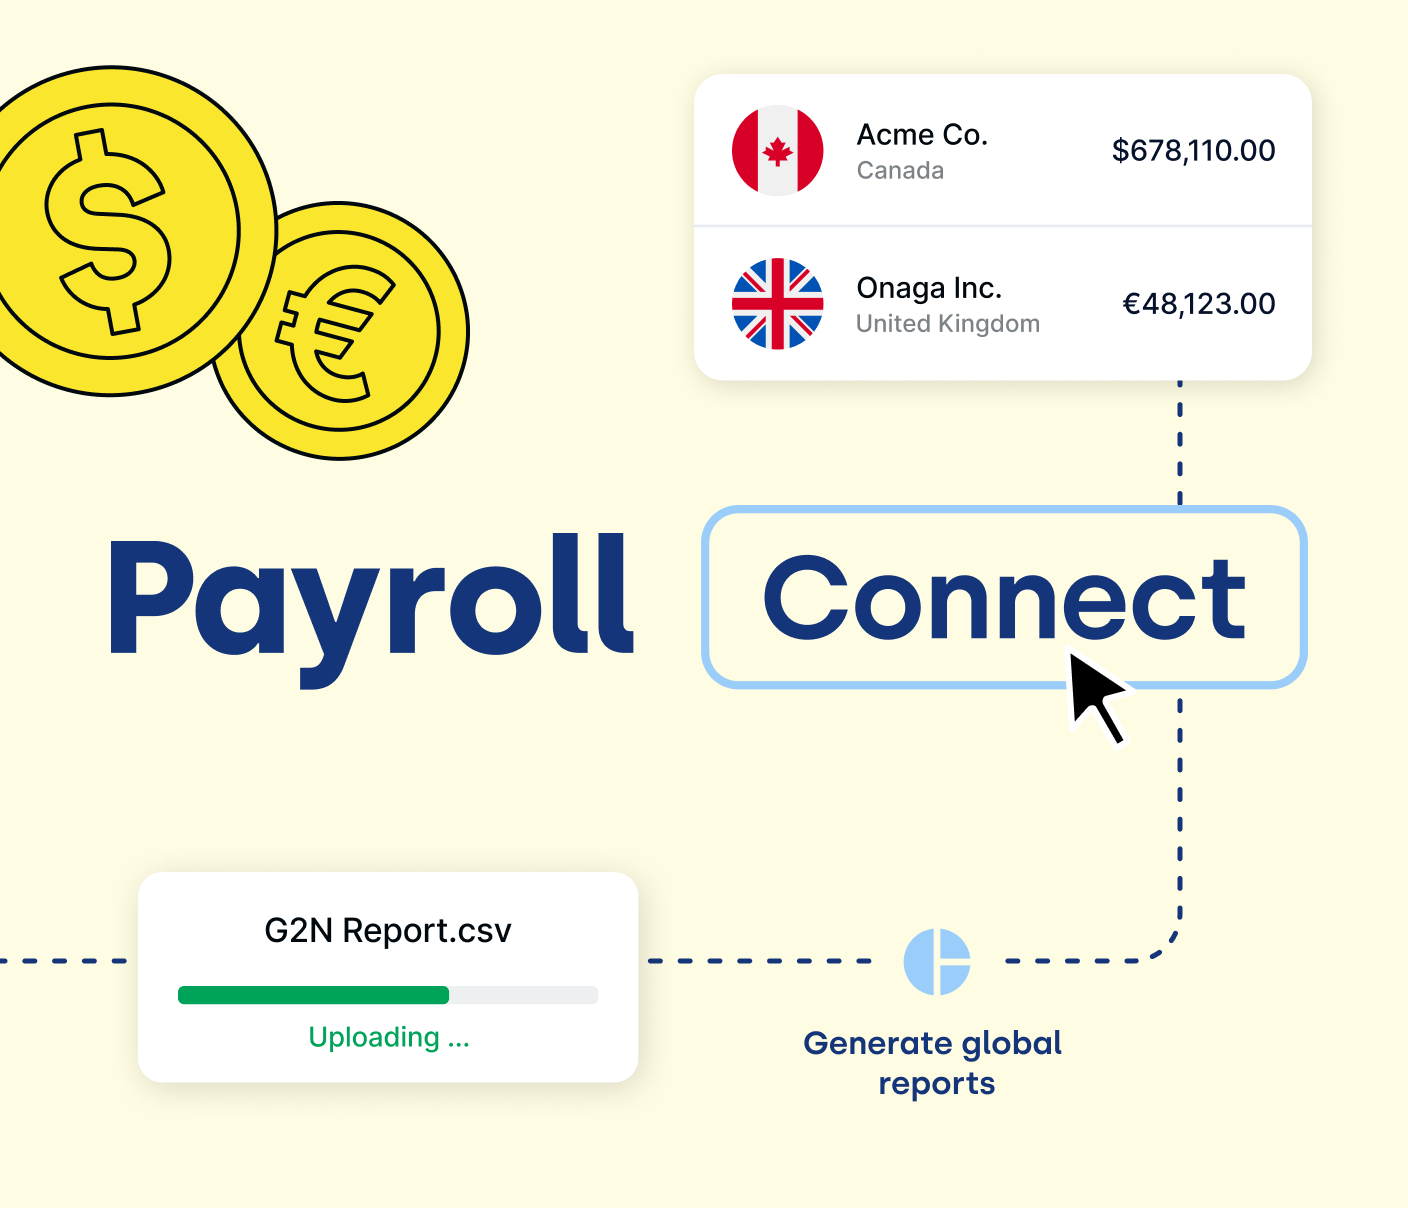 Introducing Payroll Connect